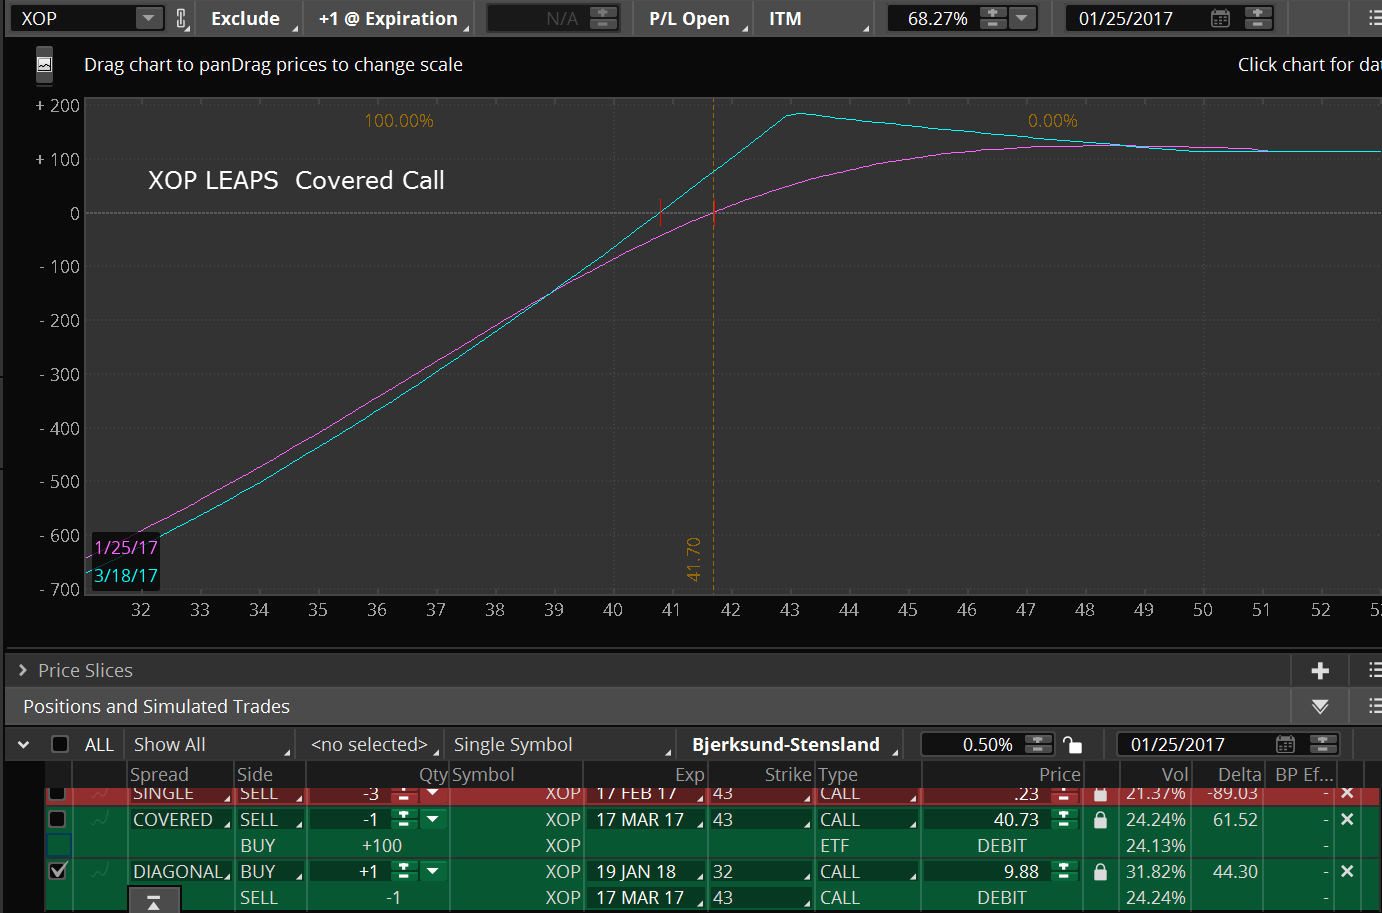 $XOP LEAPS Covered Call